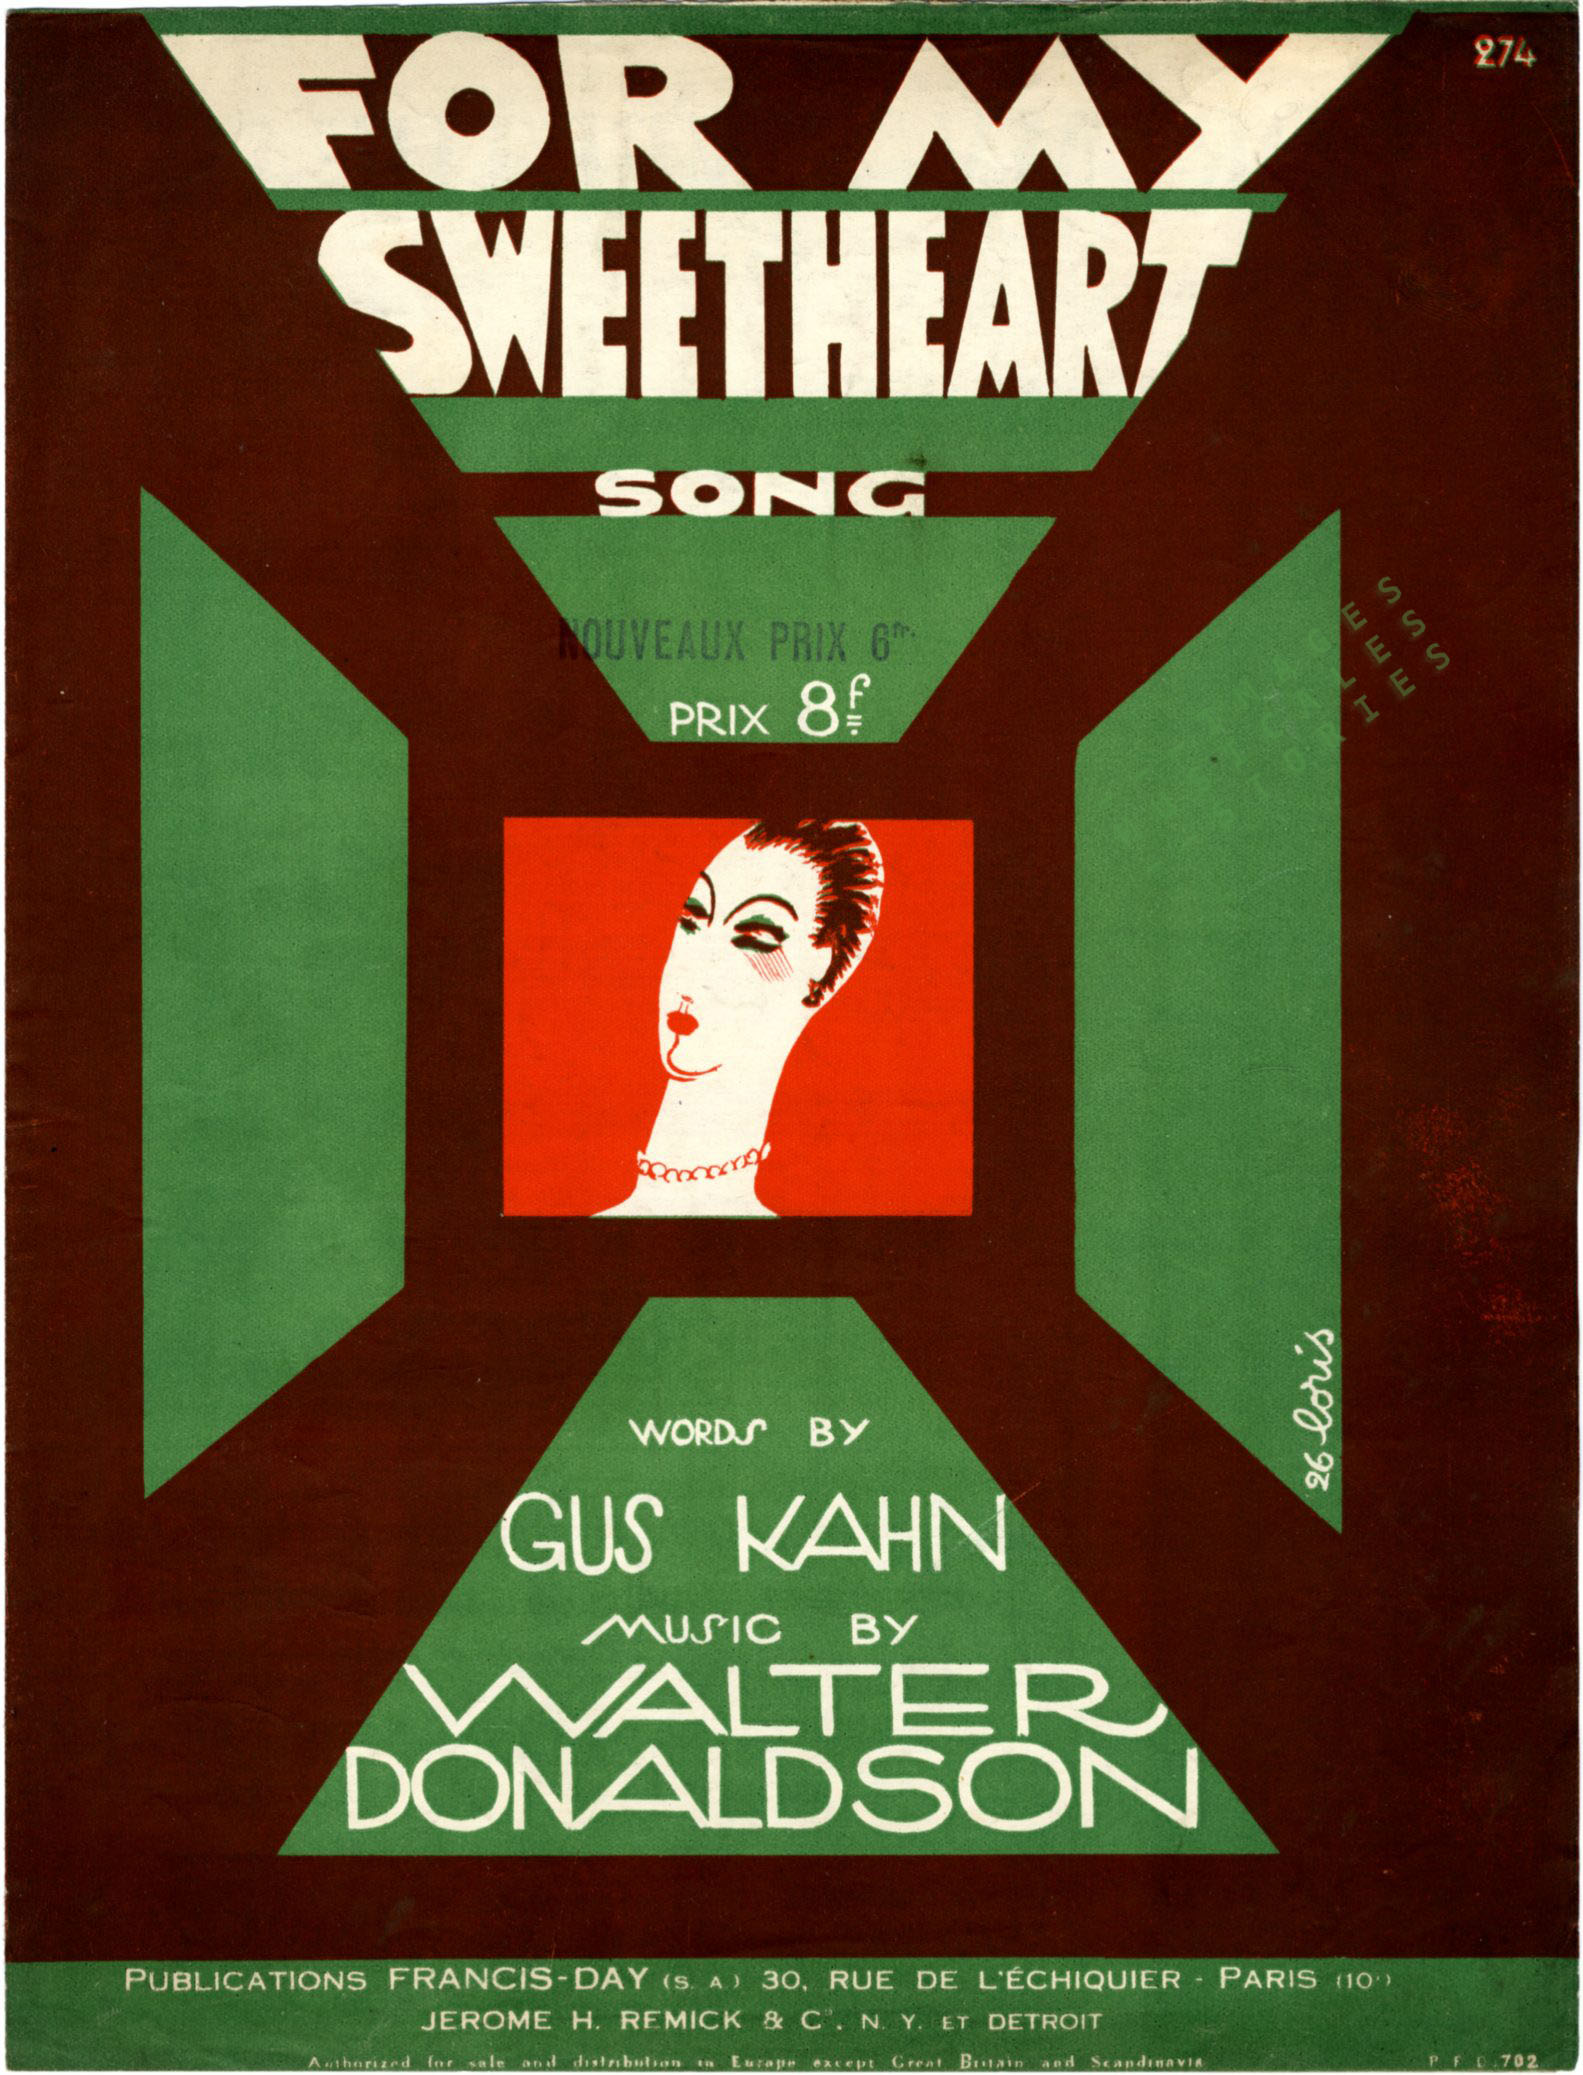 'For My Sweetheart', sheet music cover llustrated by Fabien Loris (1926)